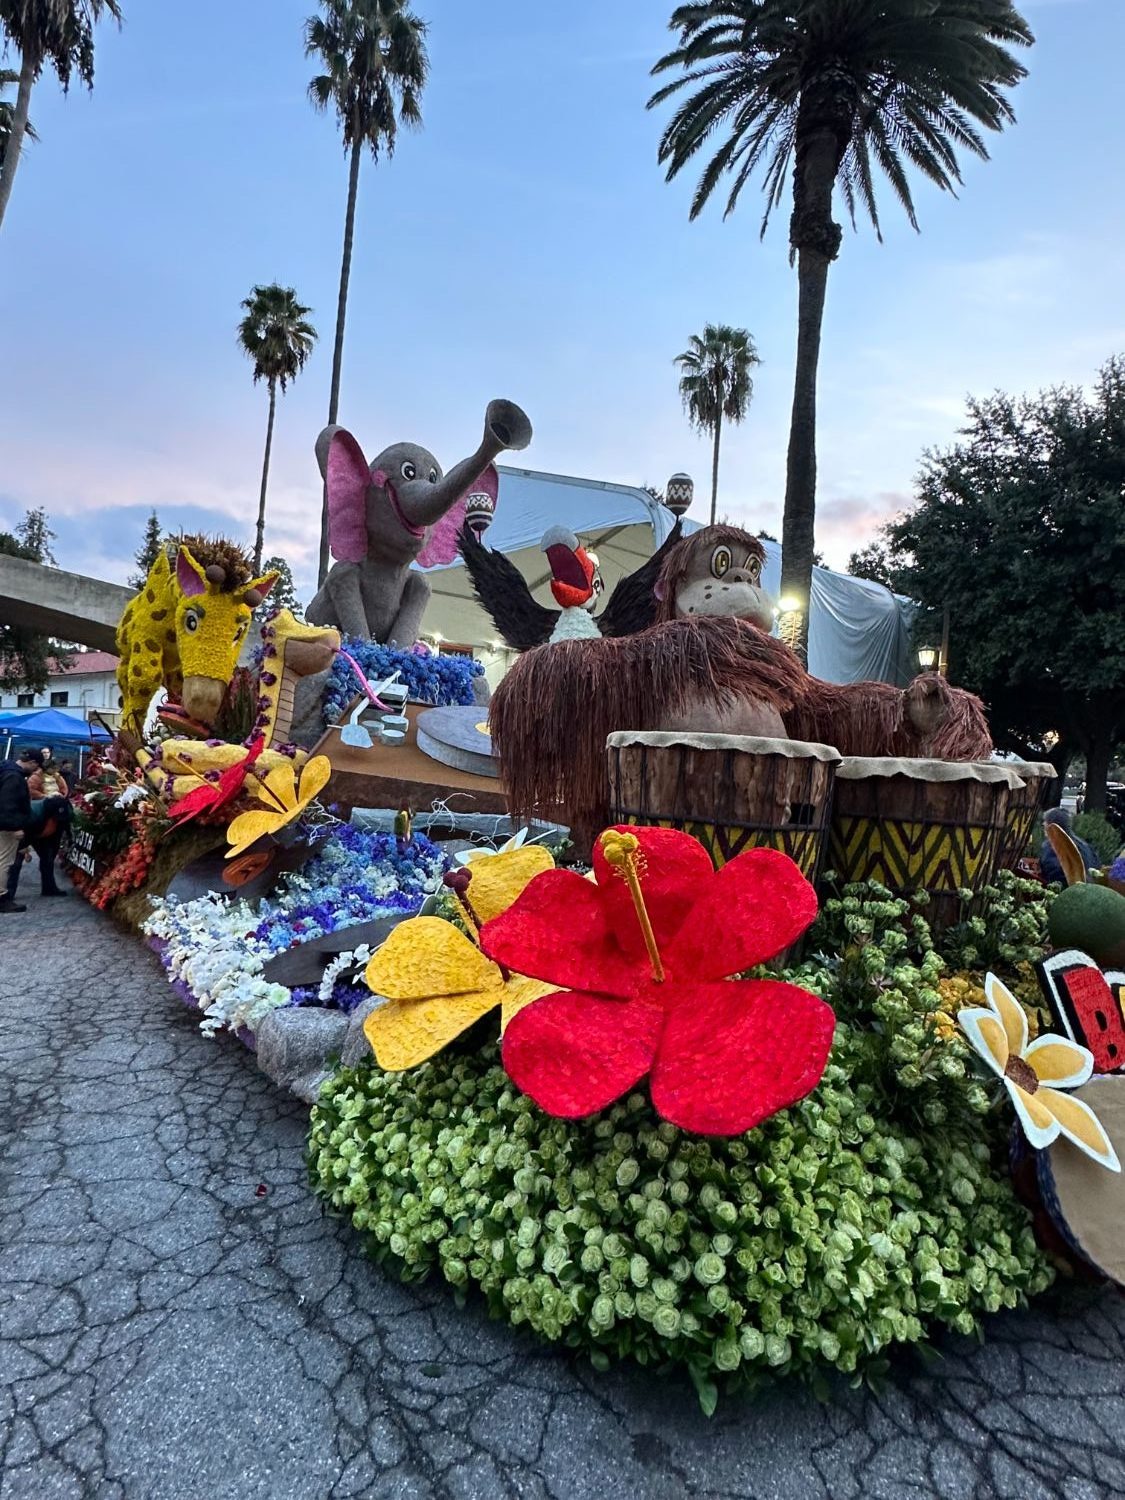 PHOTO: Bill Glazier | The South Pasadenan | South Pasadena Tournament of Roses 2024 float at the Tournament of Roses final judging on December 31, 2023.